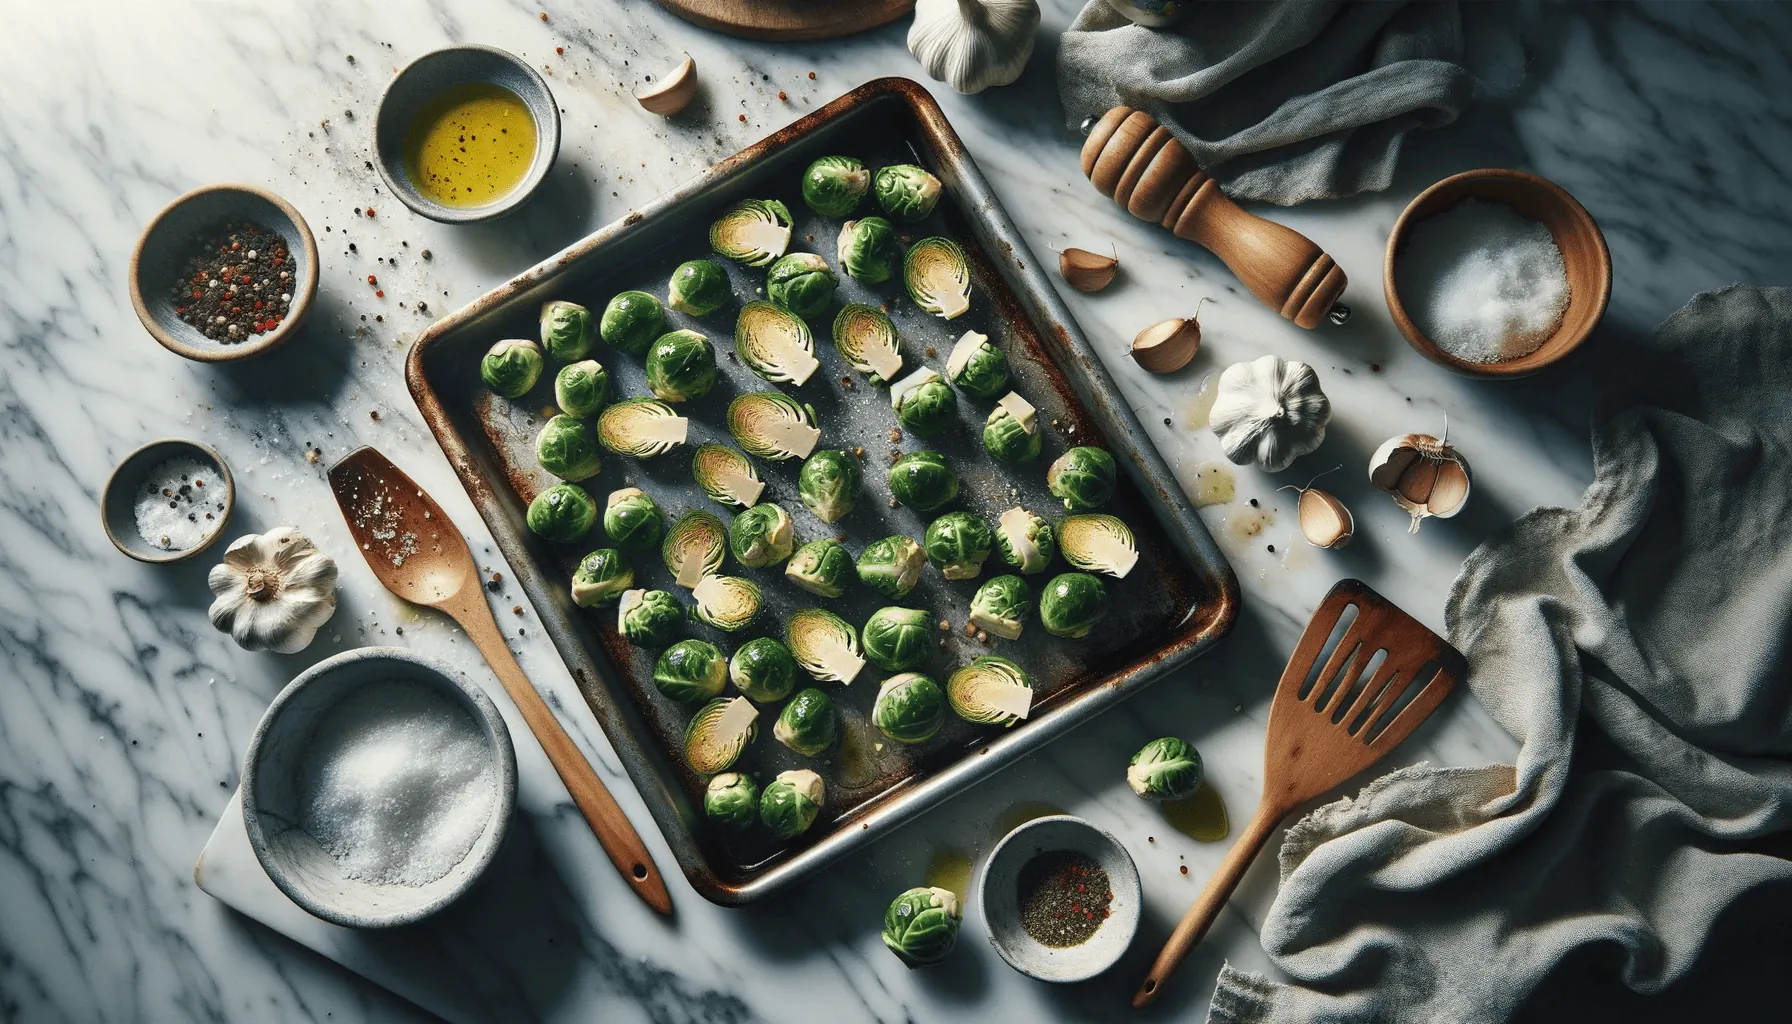 The making of crispy garlic parmesan Brussels Sprouts